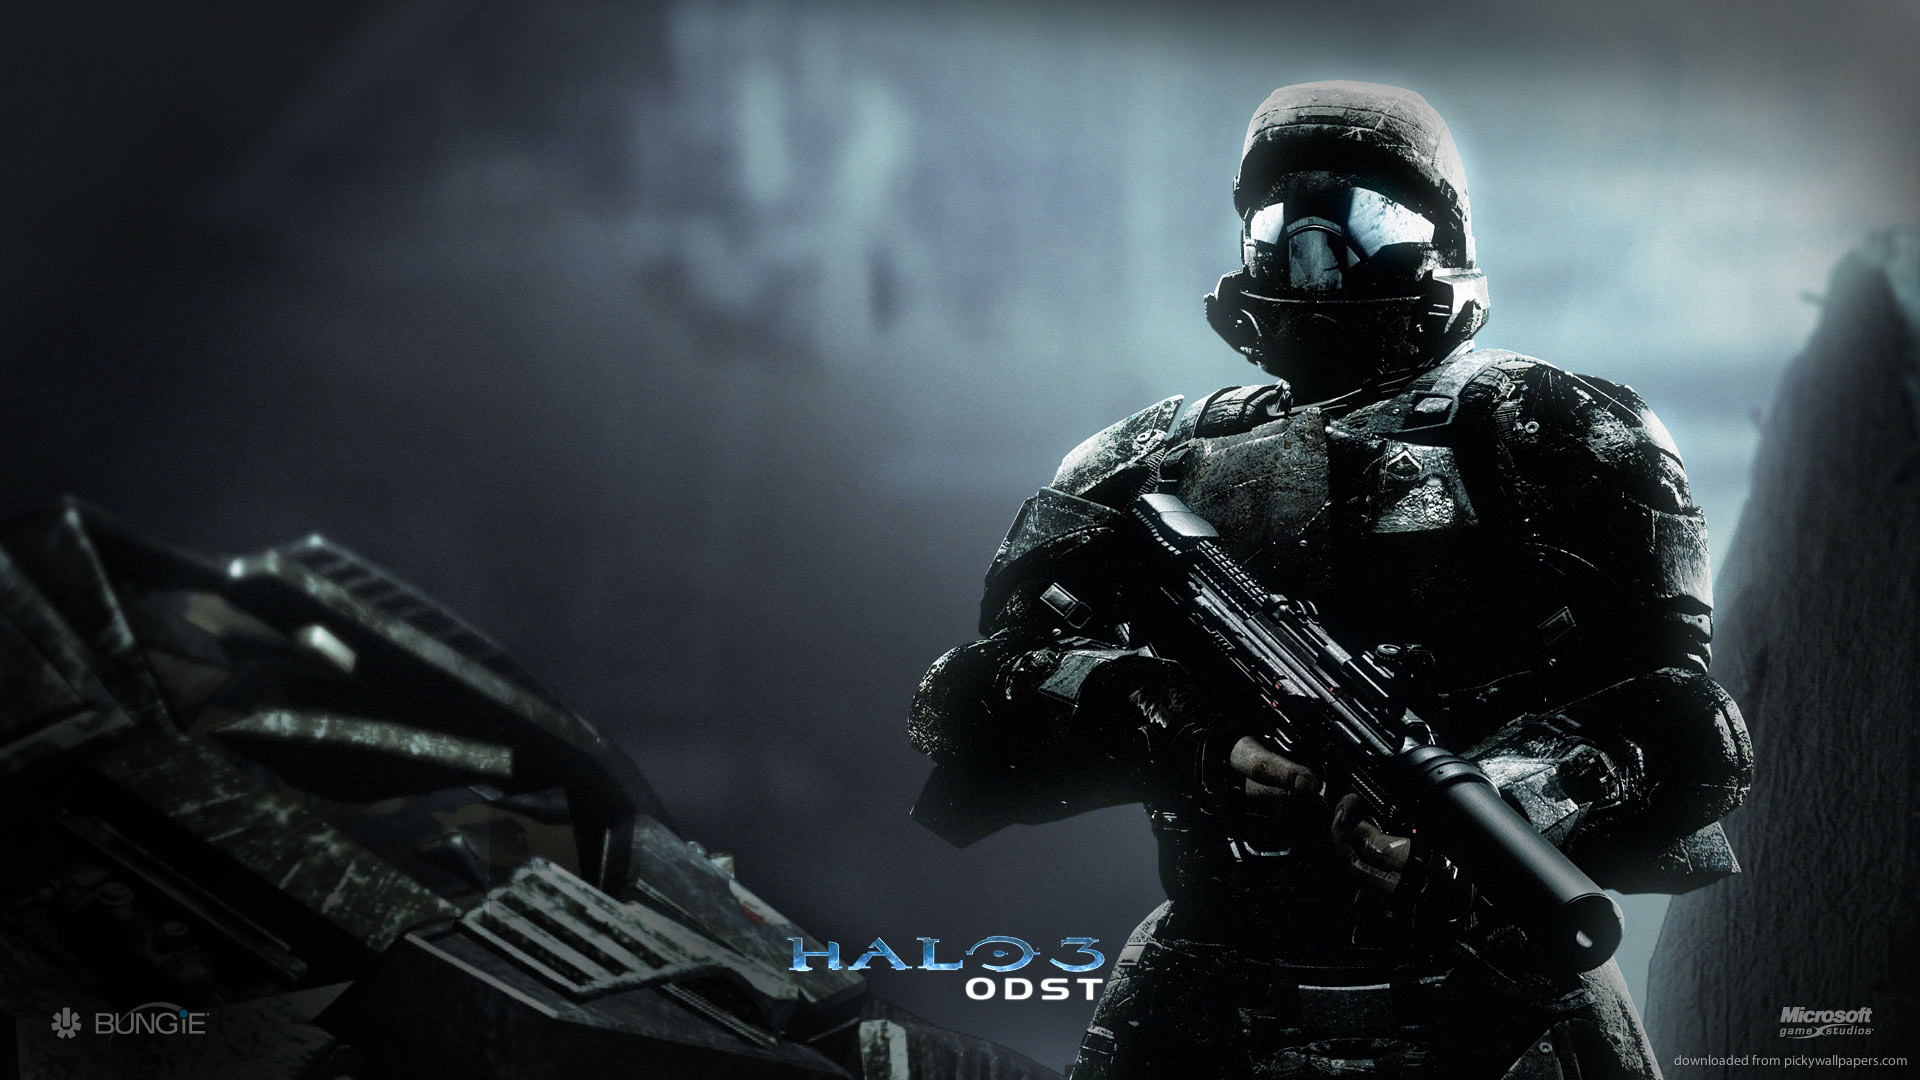 1920x1080 Halo 3 ODST picture